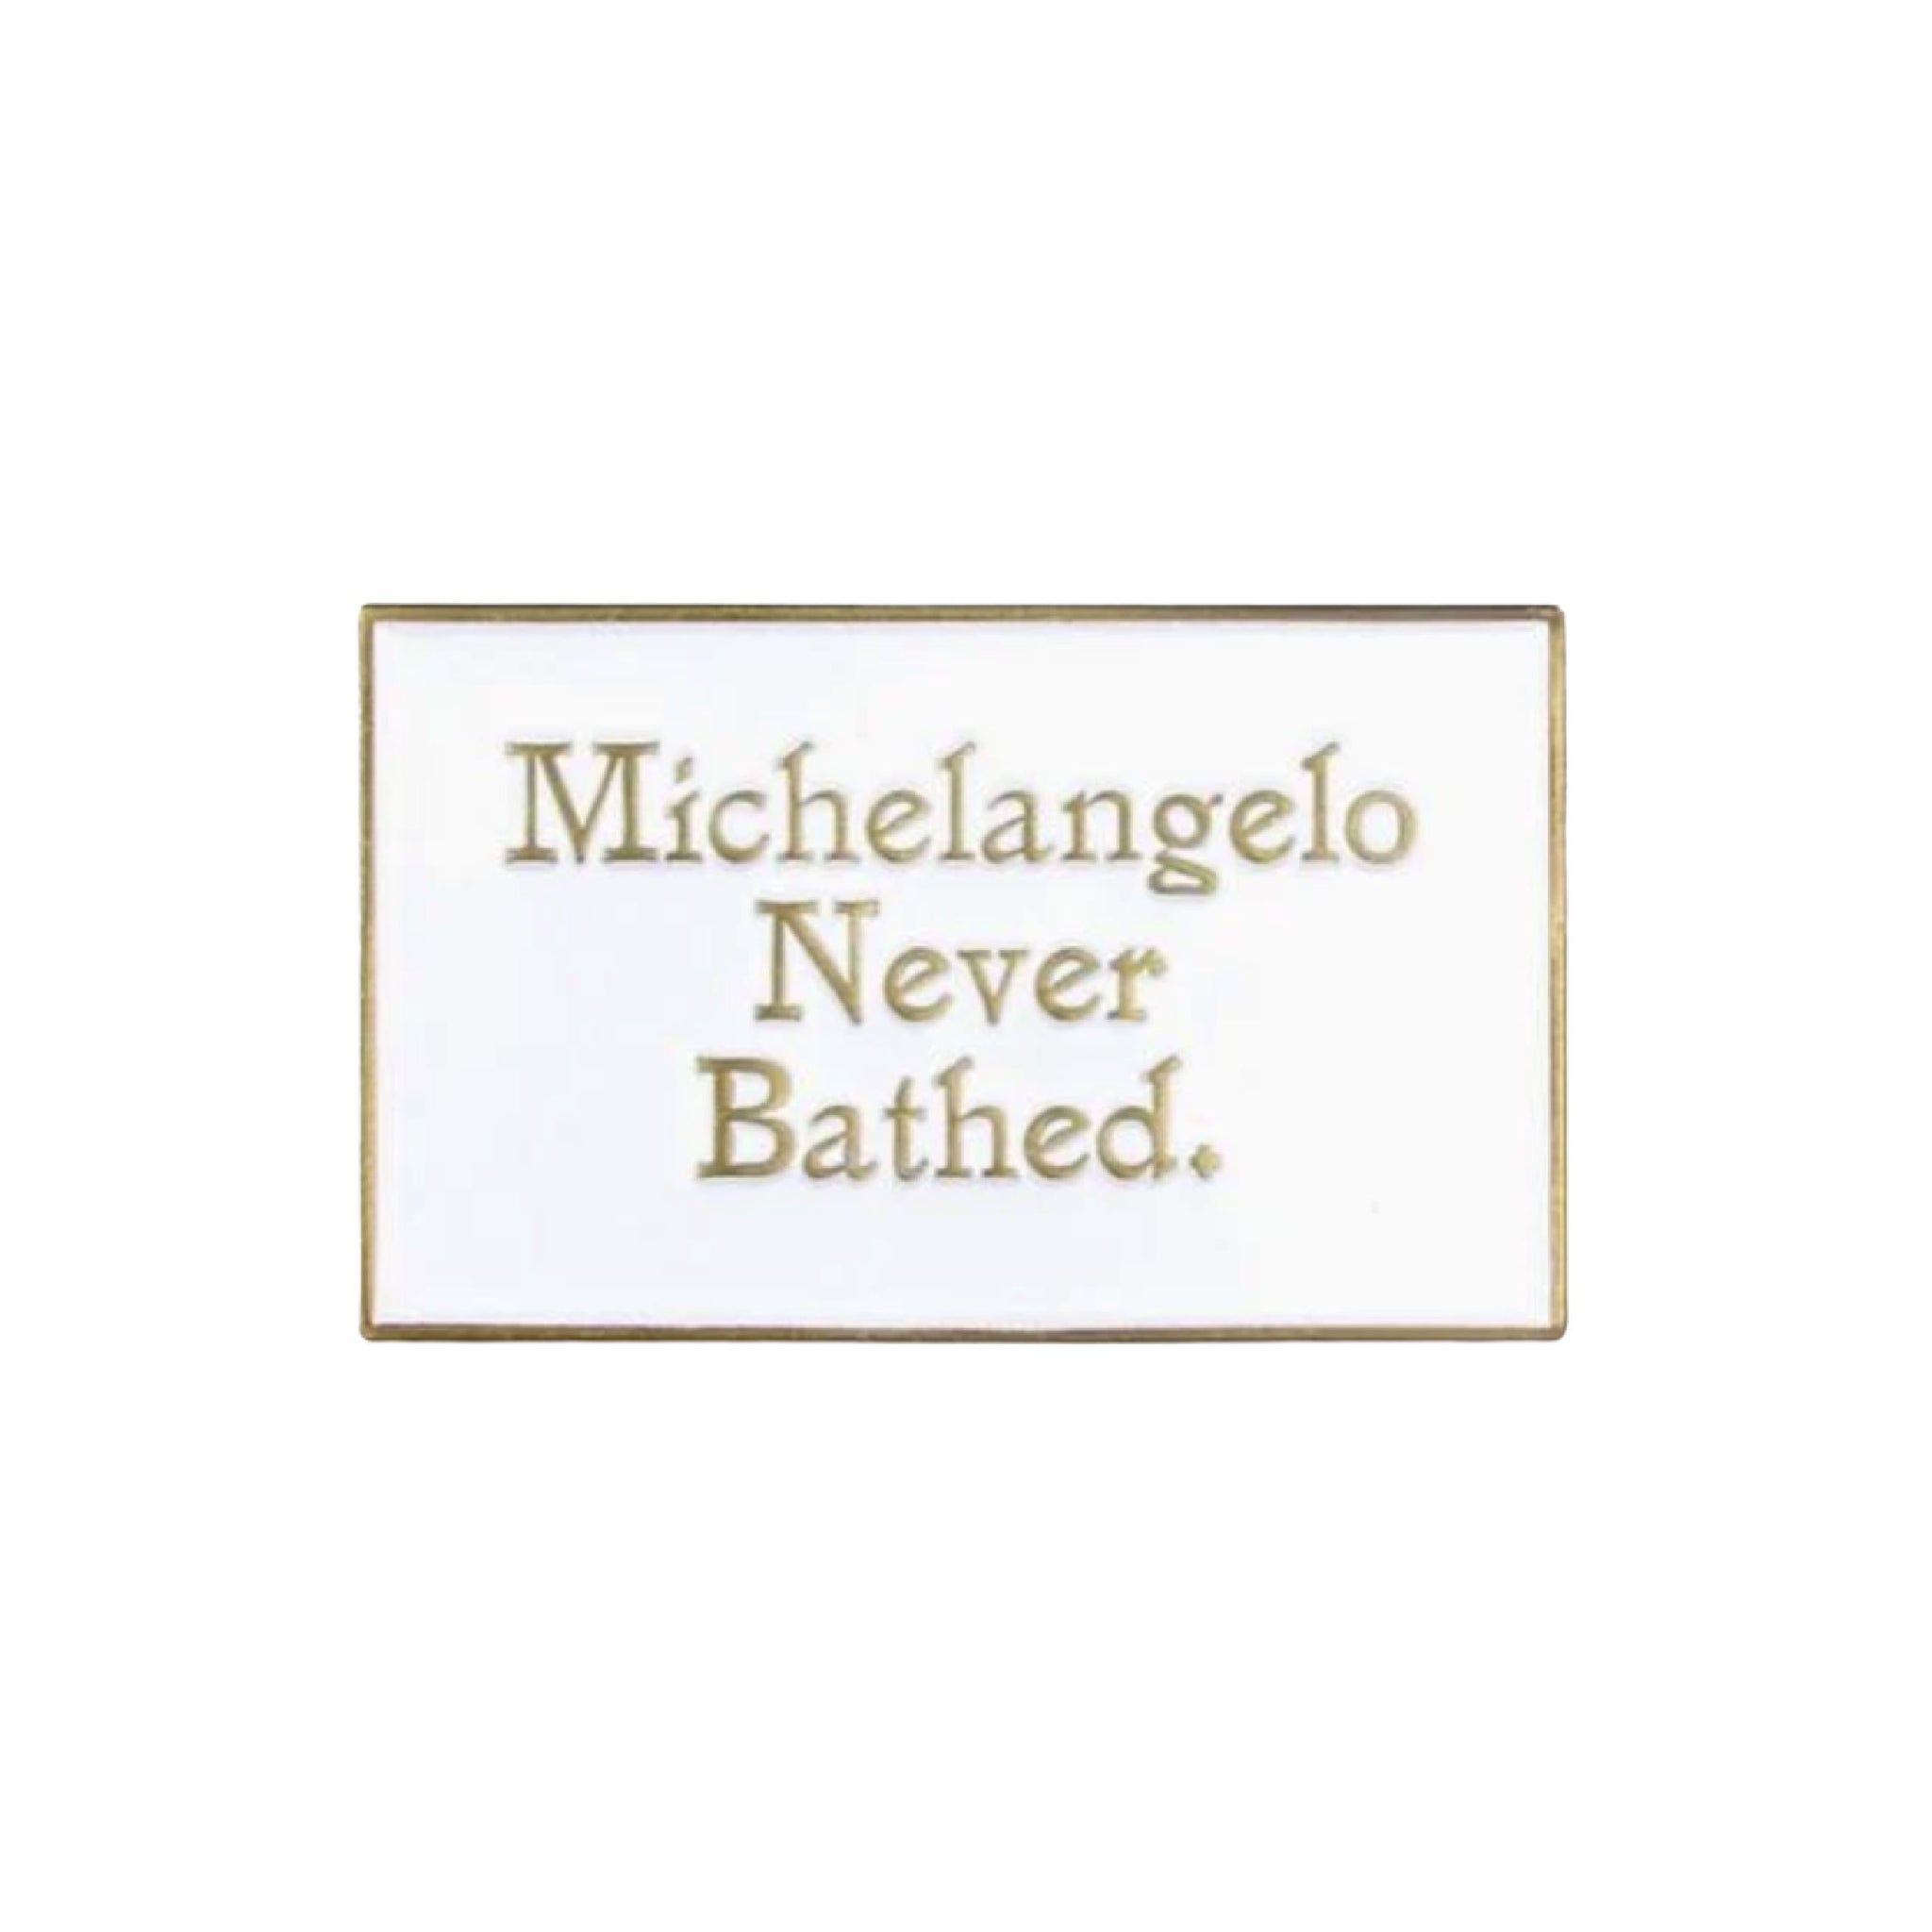 Michelangelo Never Bathed Enamel Pin - Pin Museum - Third Drawer Down